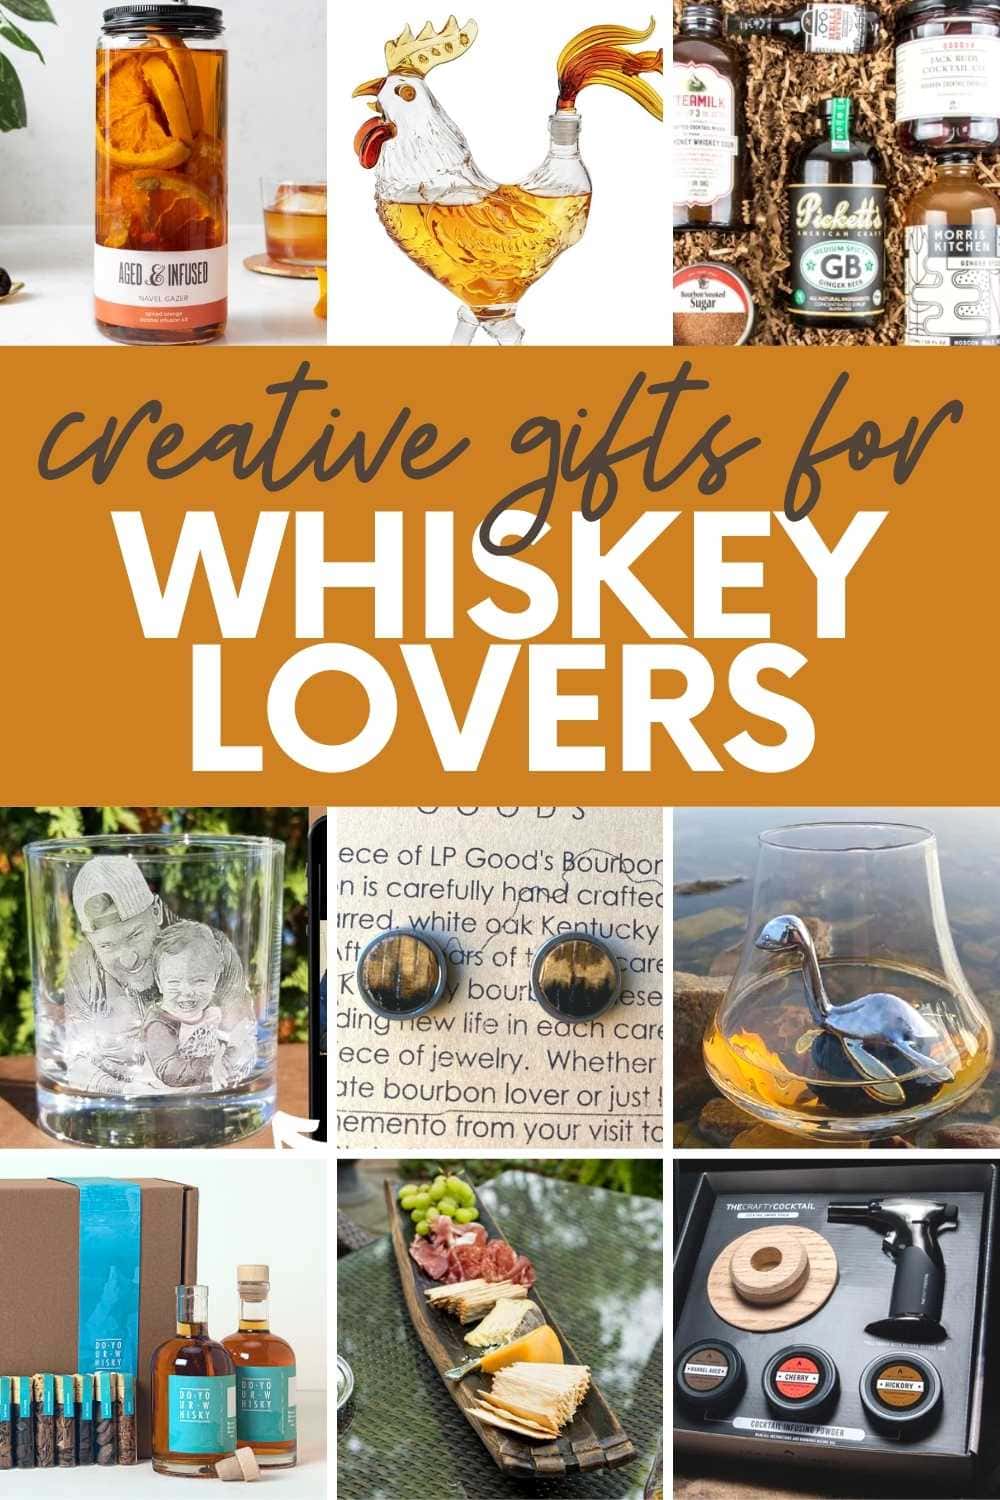 Novelty Keyring Made Me Do It Alcohol Lover Present Fun Whiskey Lover Gift 